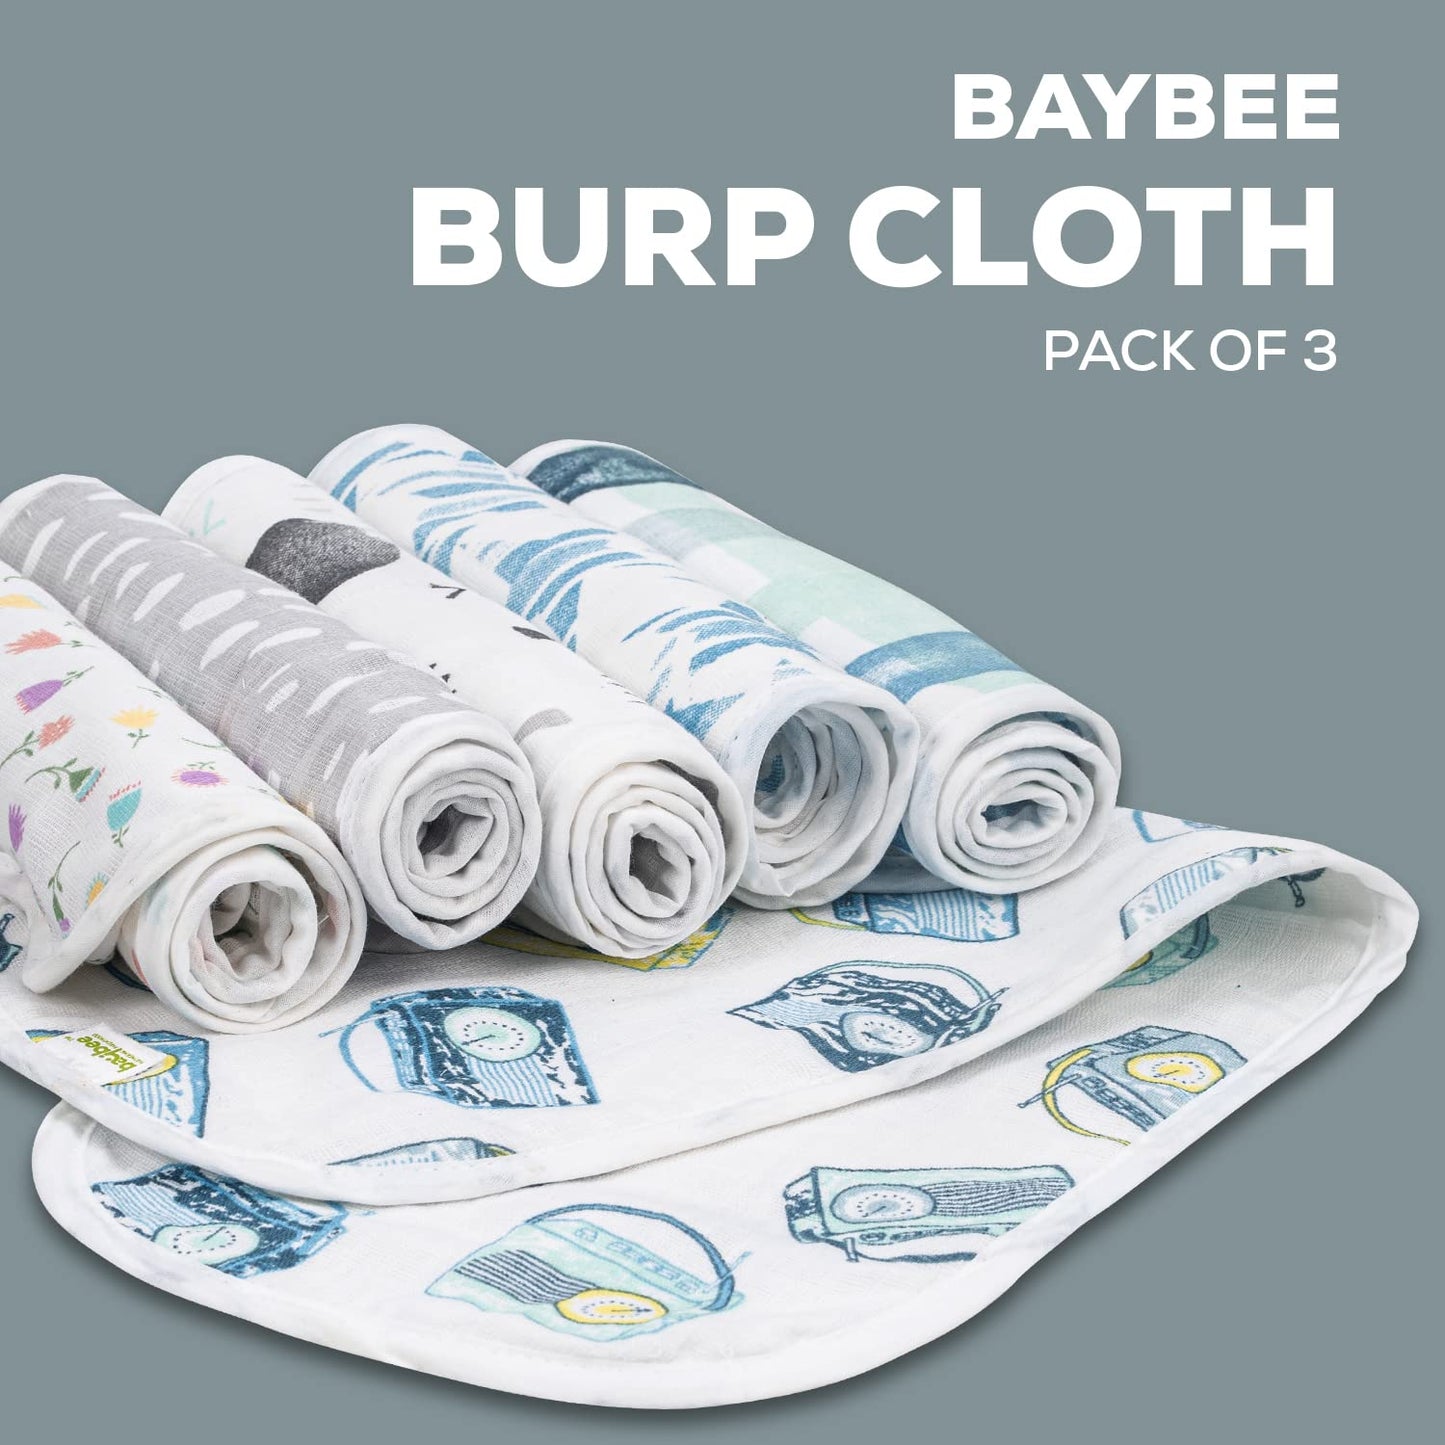 BAYBEE 100% Washable Cotton Baby Muslin Burp Clothes Napkins for New Born Babies (Pack of 3)